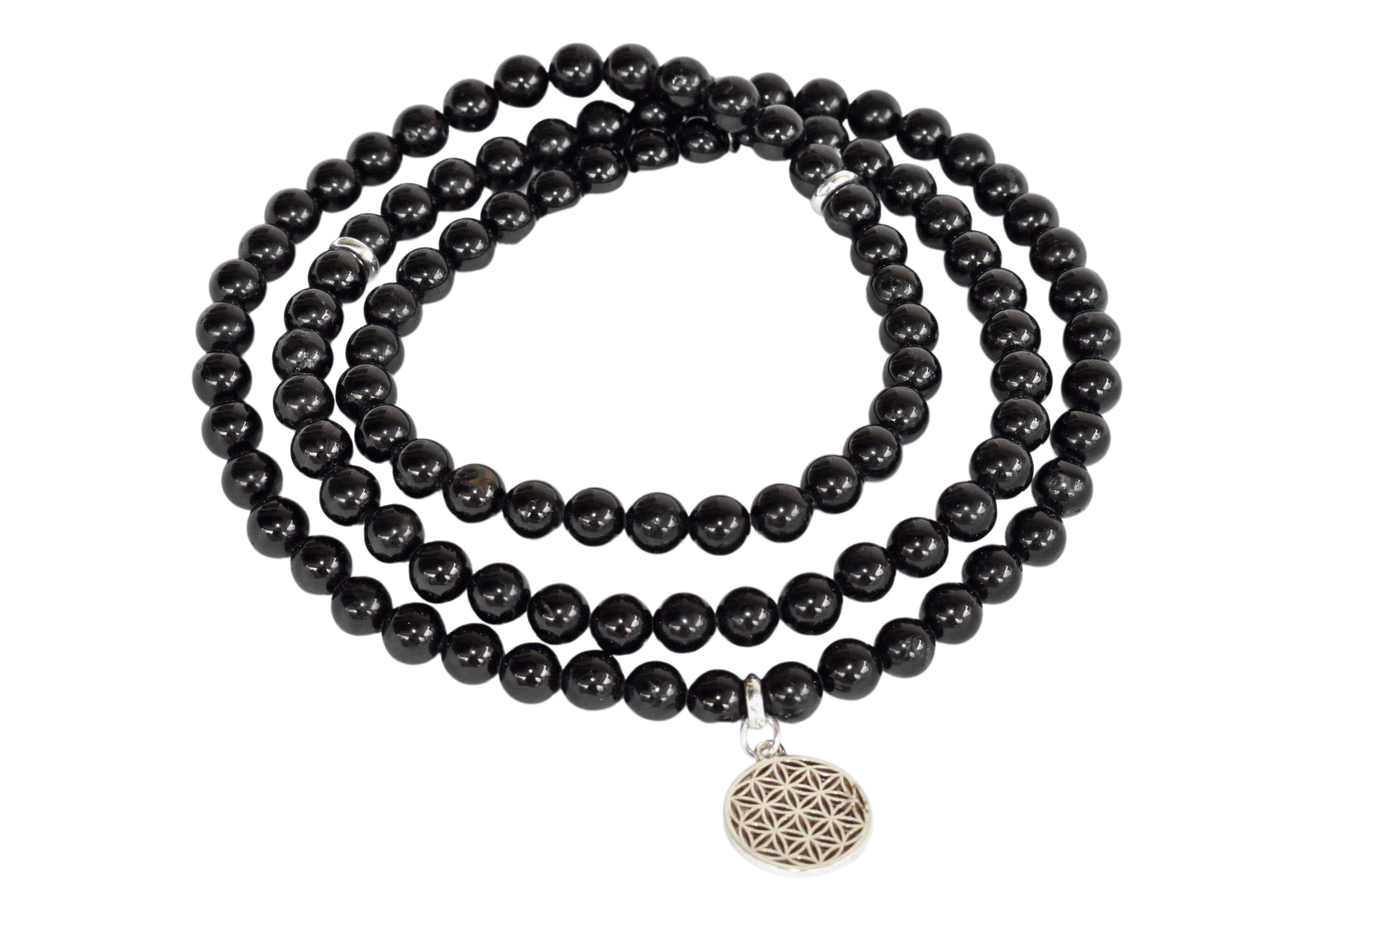 Black Tourmaline Beads Mala Bracelet, 108 Prayer Beads Necklace (Physical Ailments and Growth)